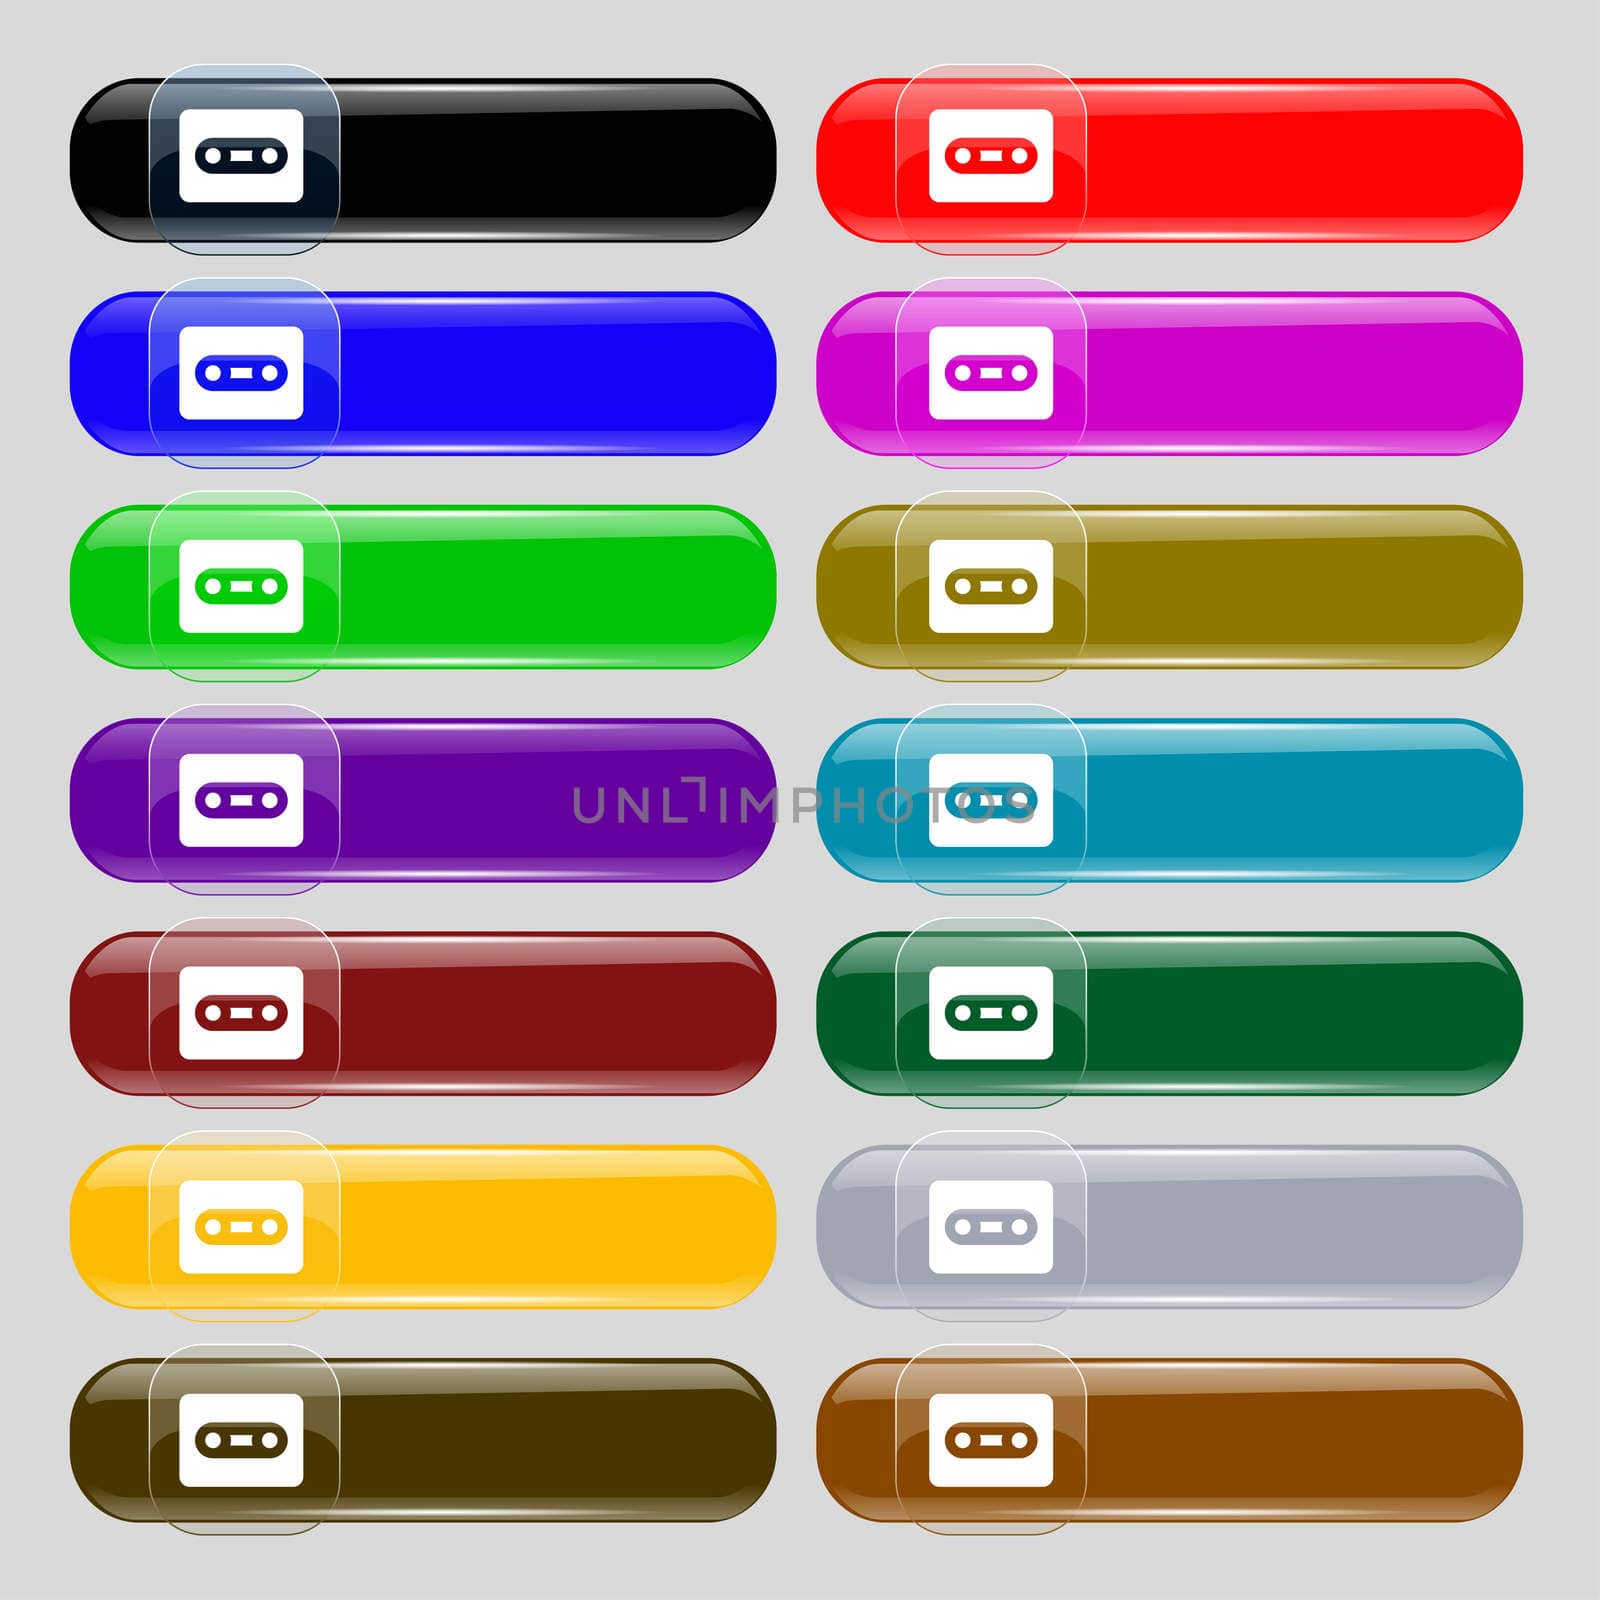 Cassette icon sign. Set from fourteen multi-colored glass buttons with place for text. illustration